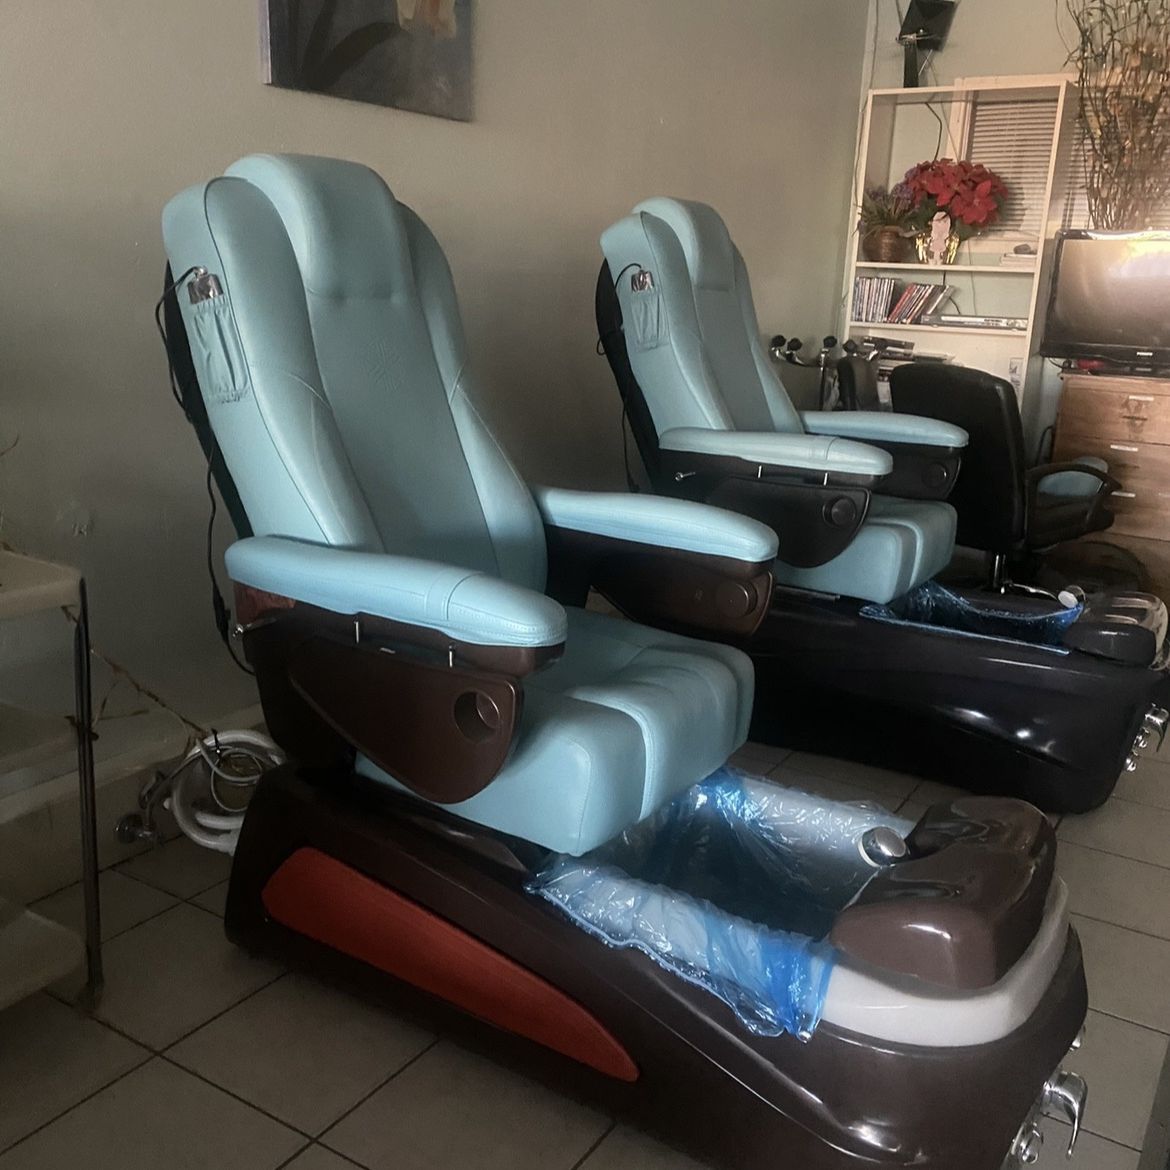 One Spa Pedicure Chair Left!